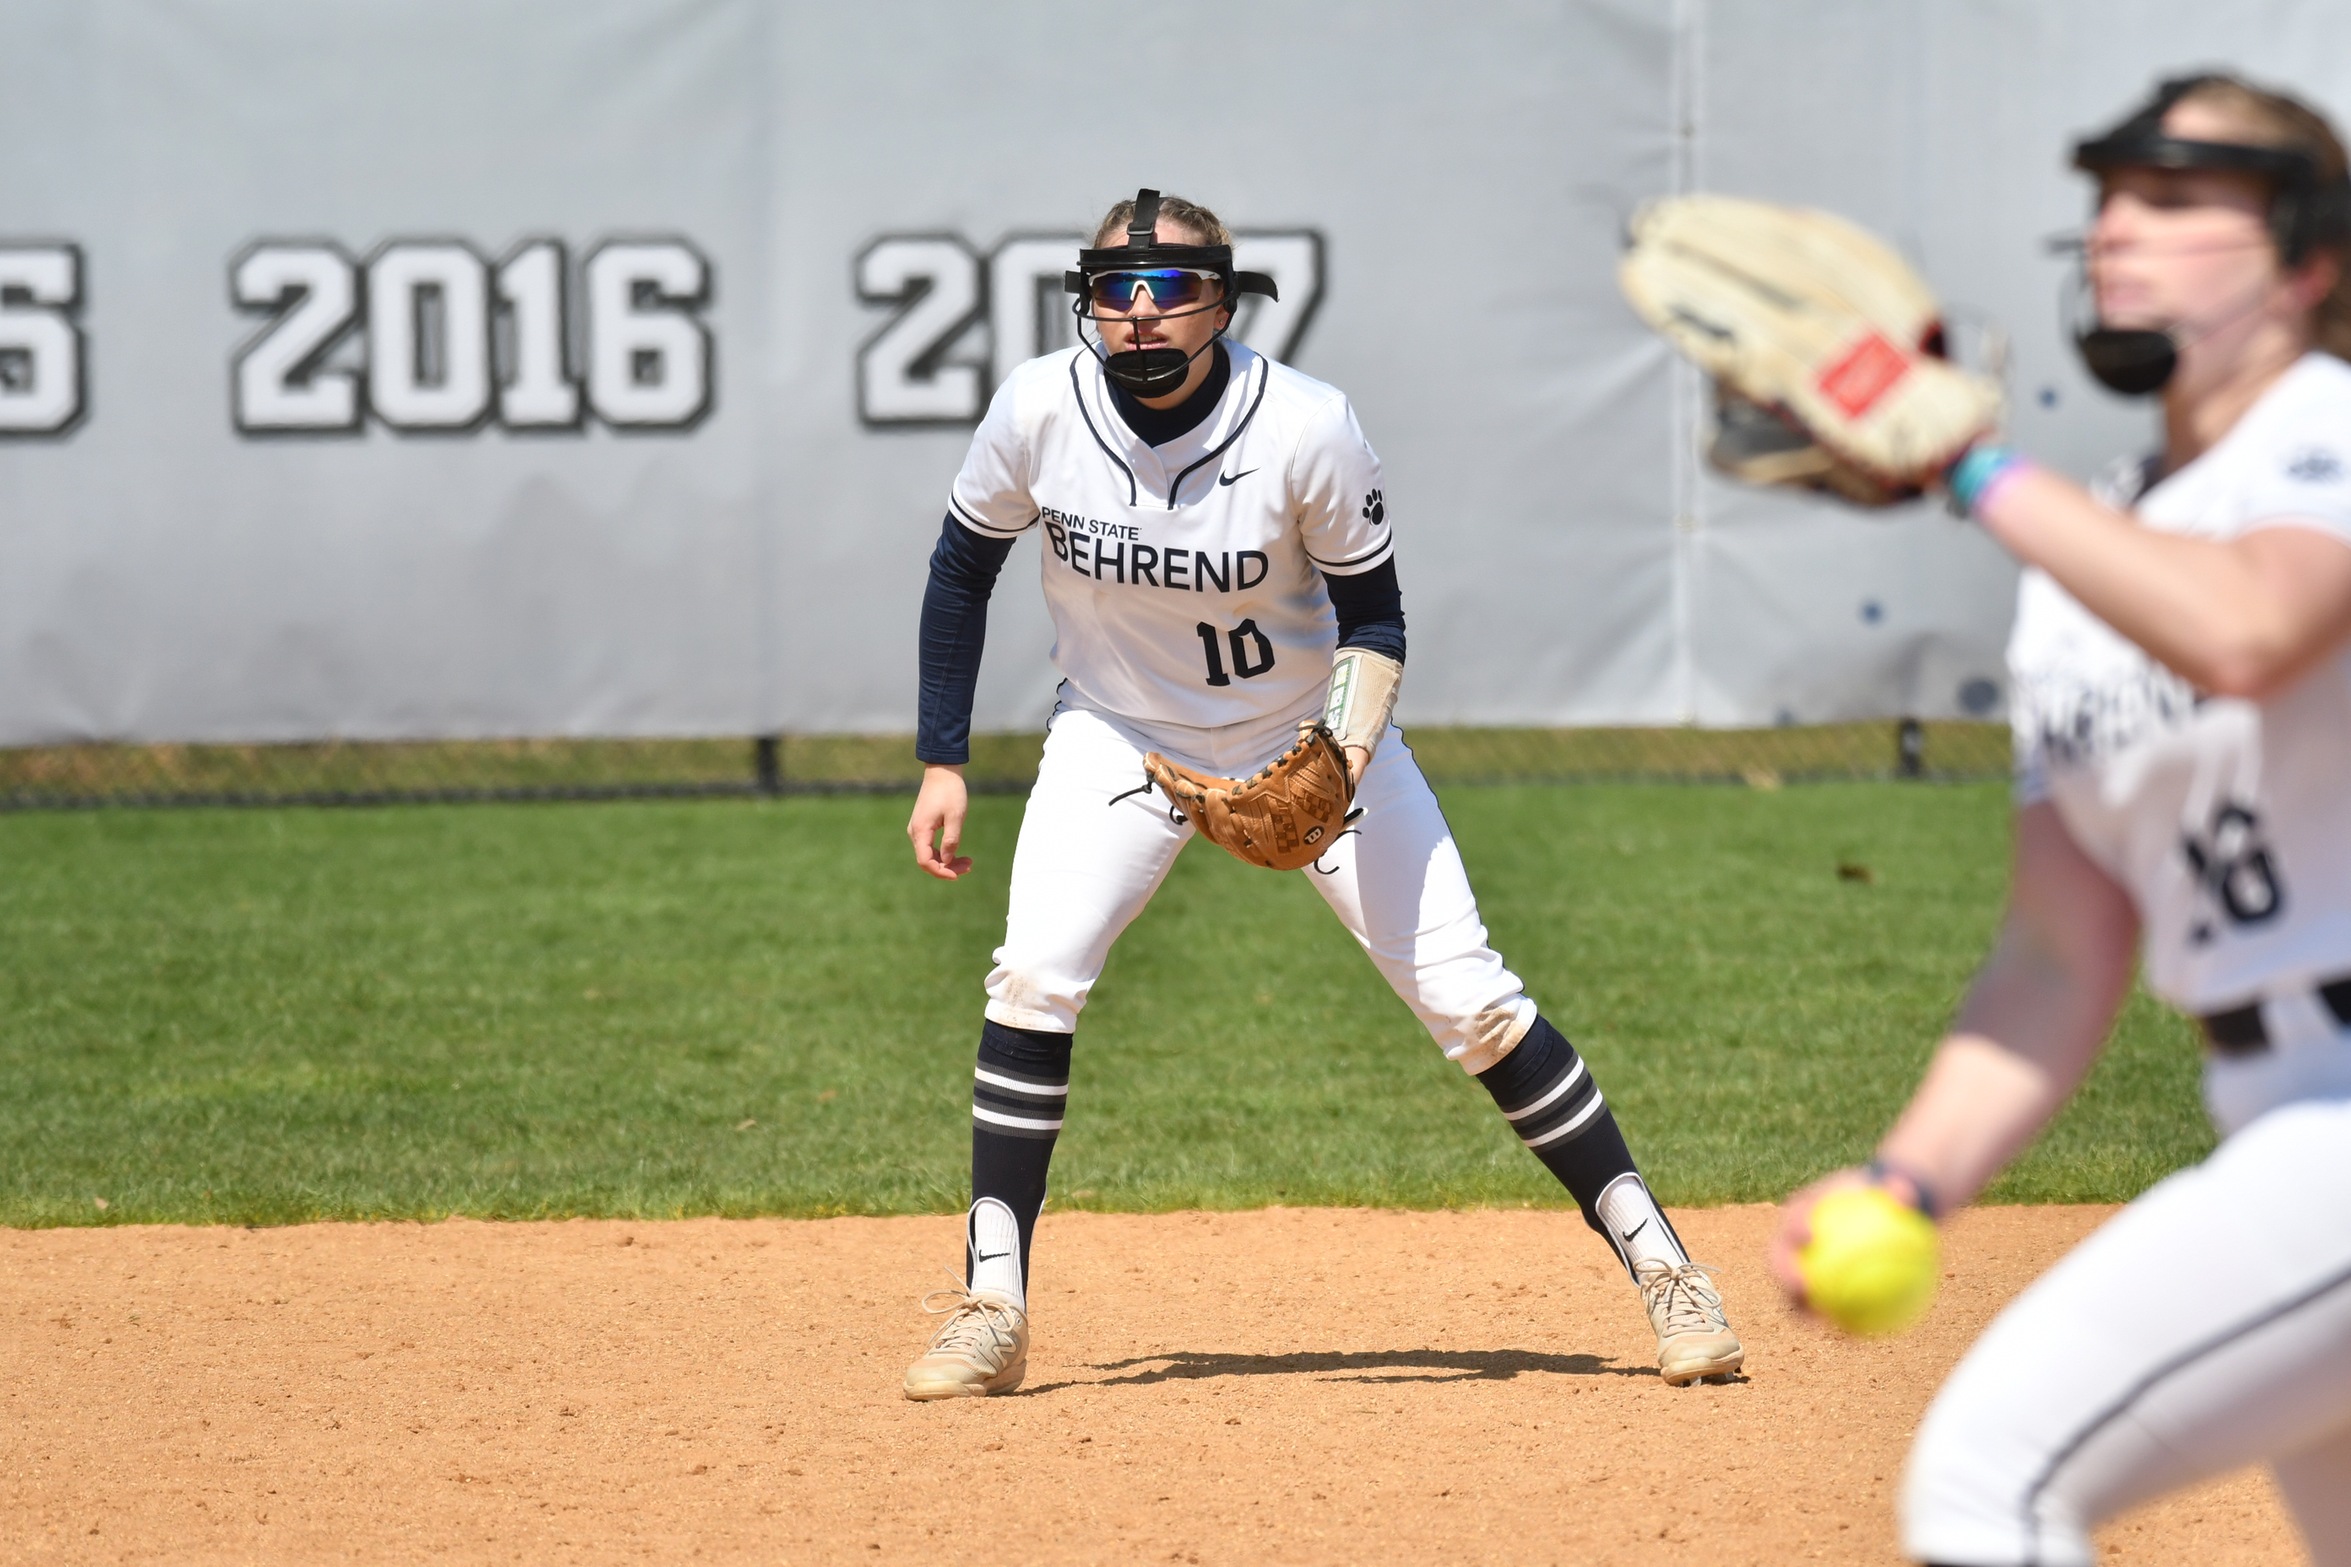 Behrend Falls in Extras To Cardinals; Comes Up Short vs. Sage